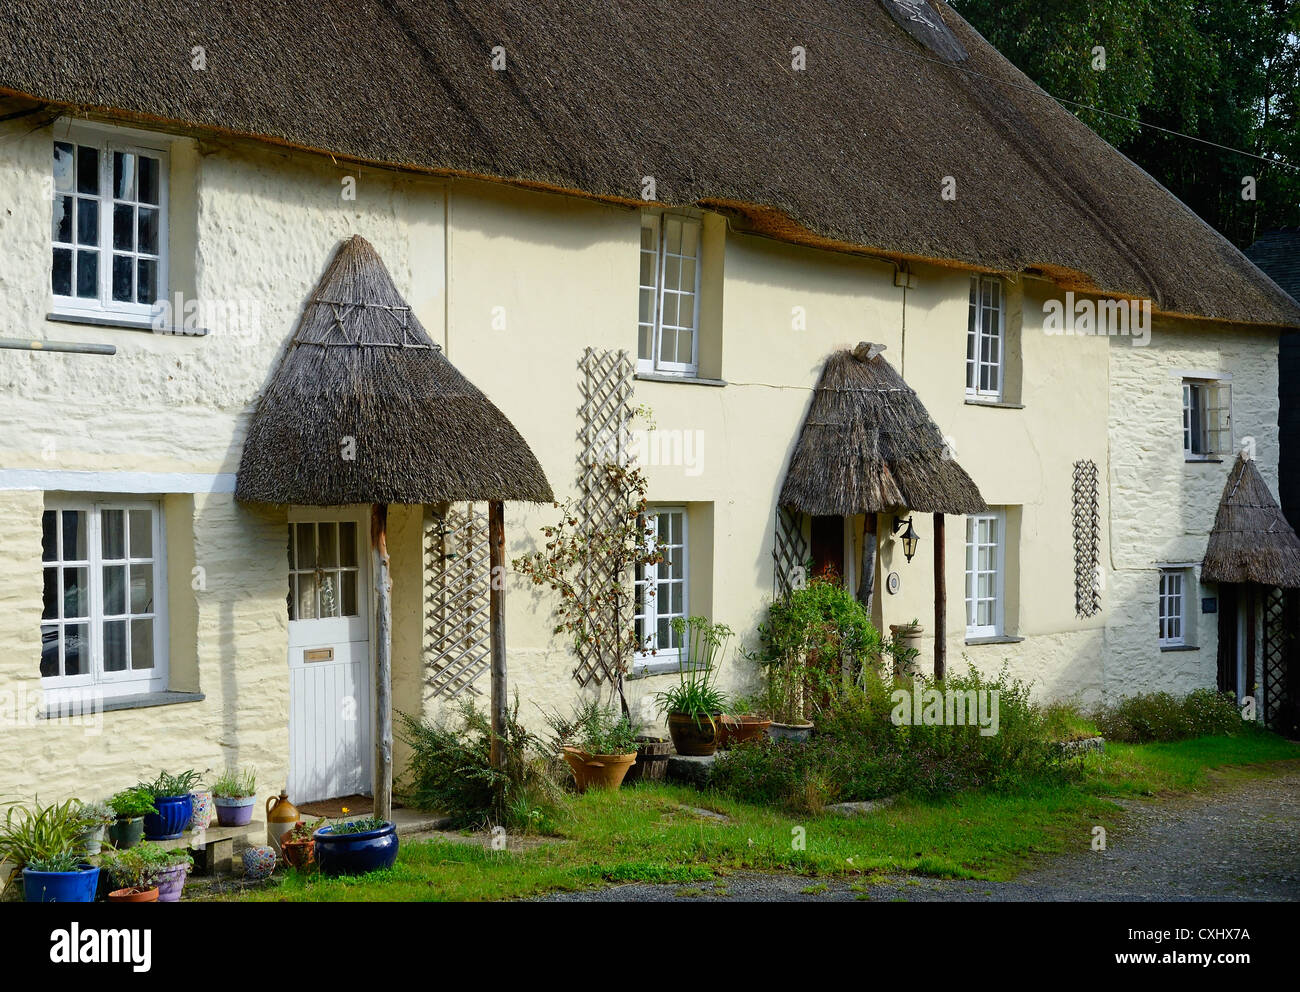 Thatched cottages in the hamlet of St.Clement near Truro, Cornwall, UK Stock Photo